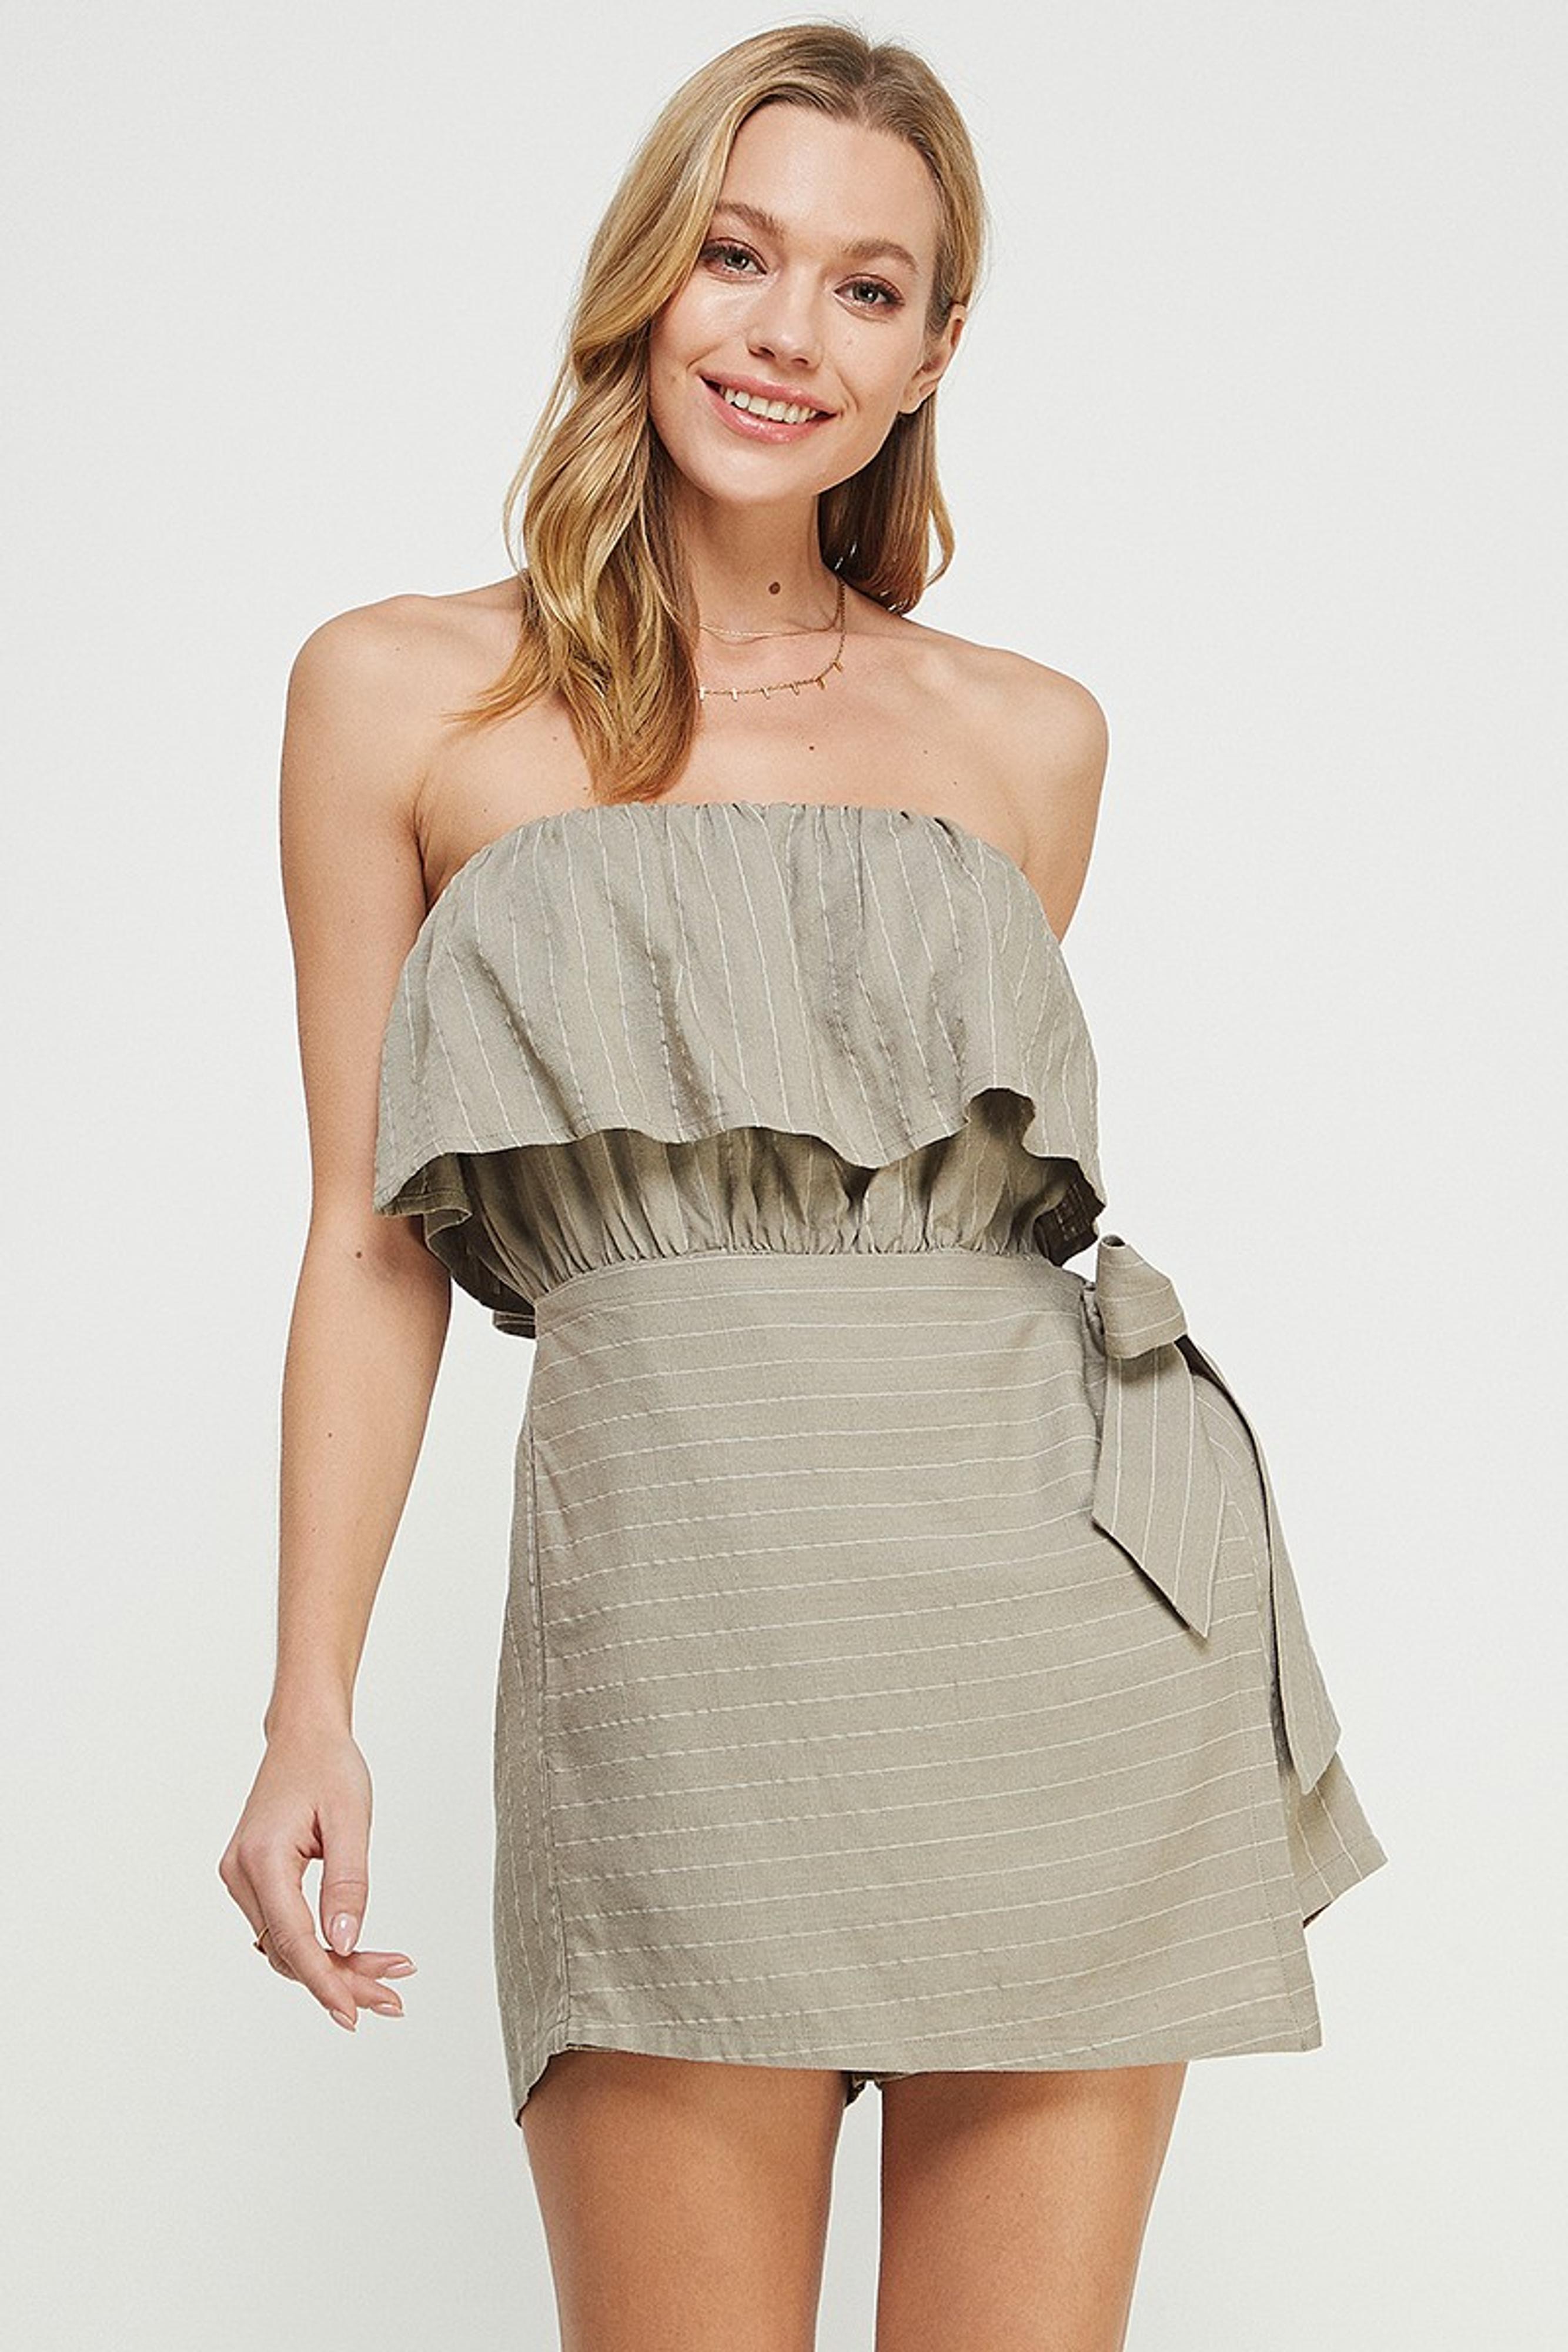  Sunny Days Out Strapless Tie Detail Romper